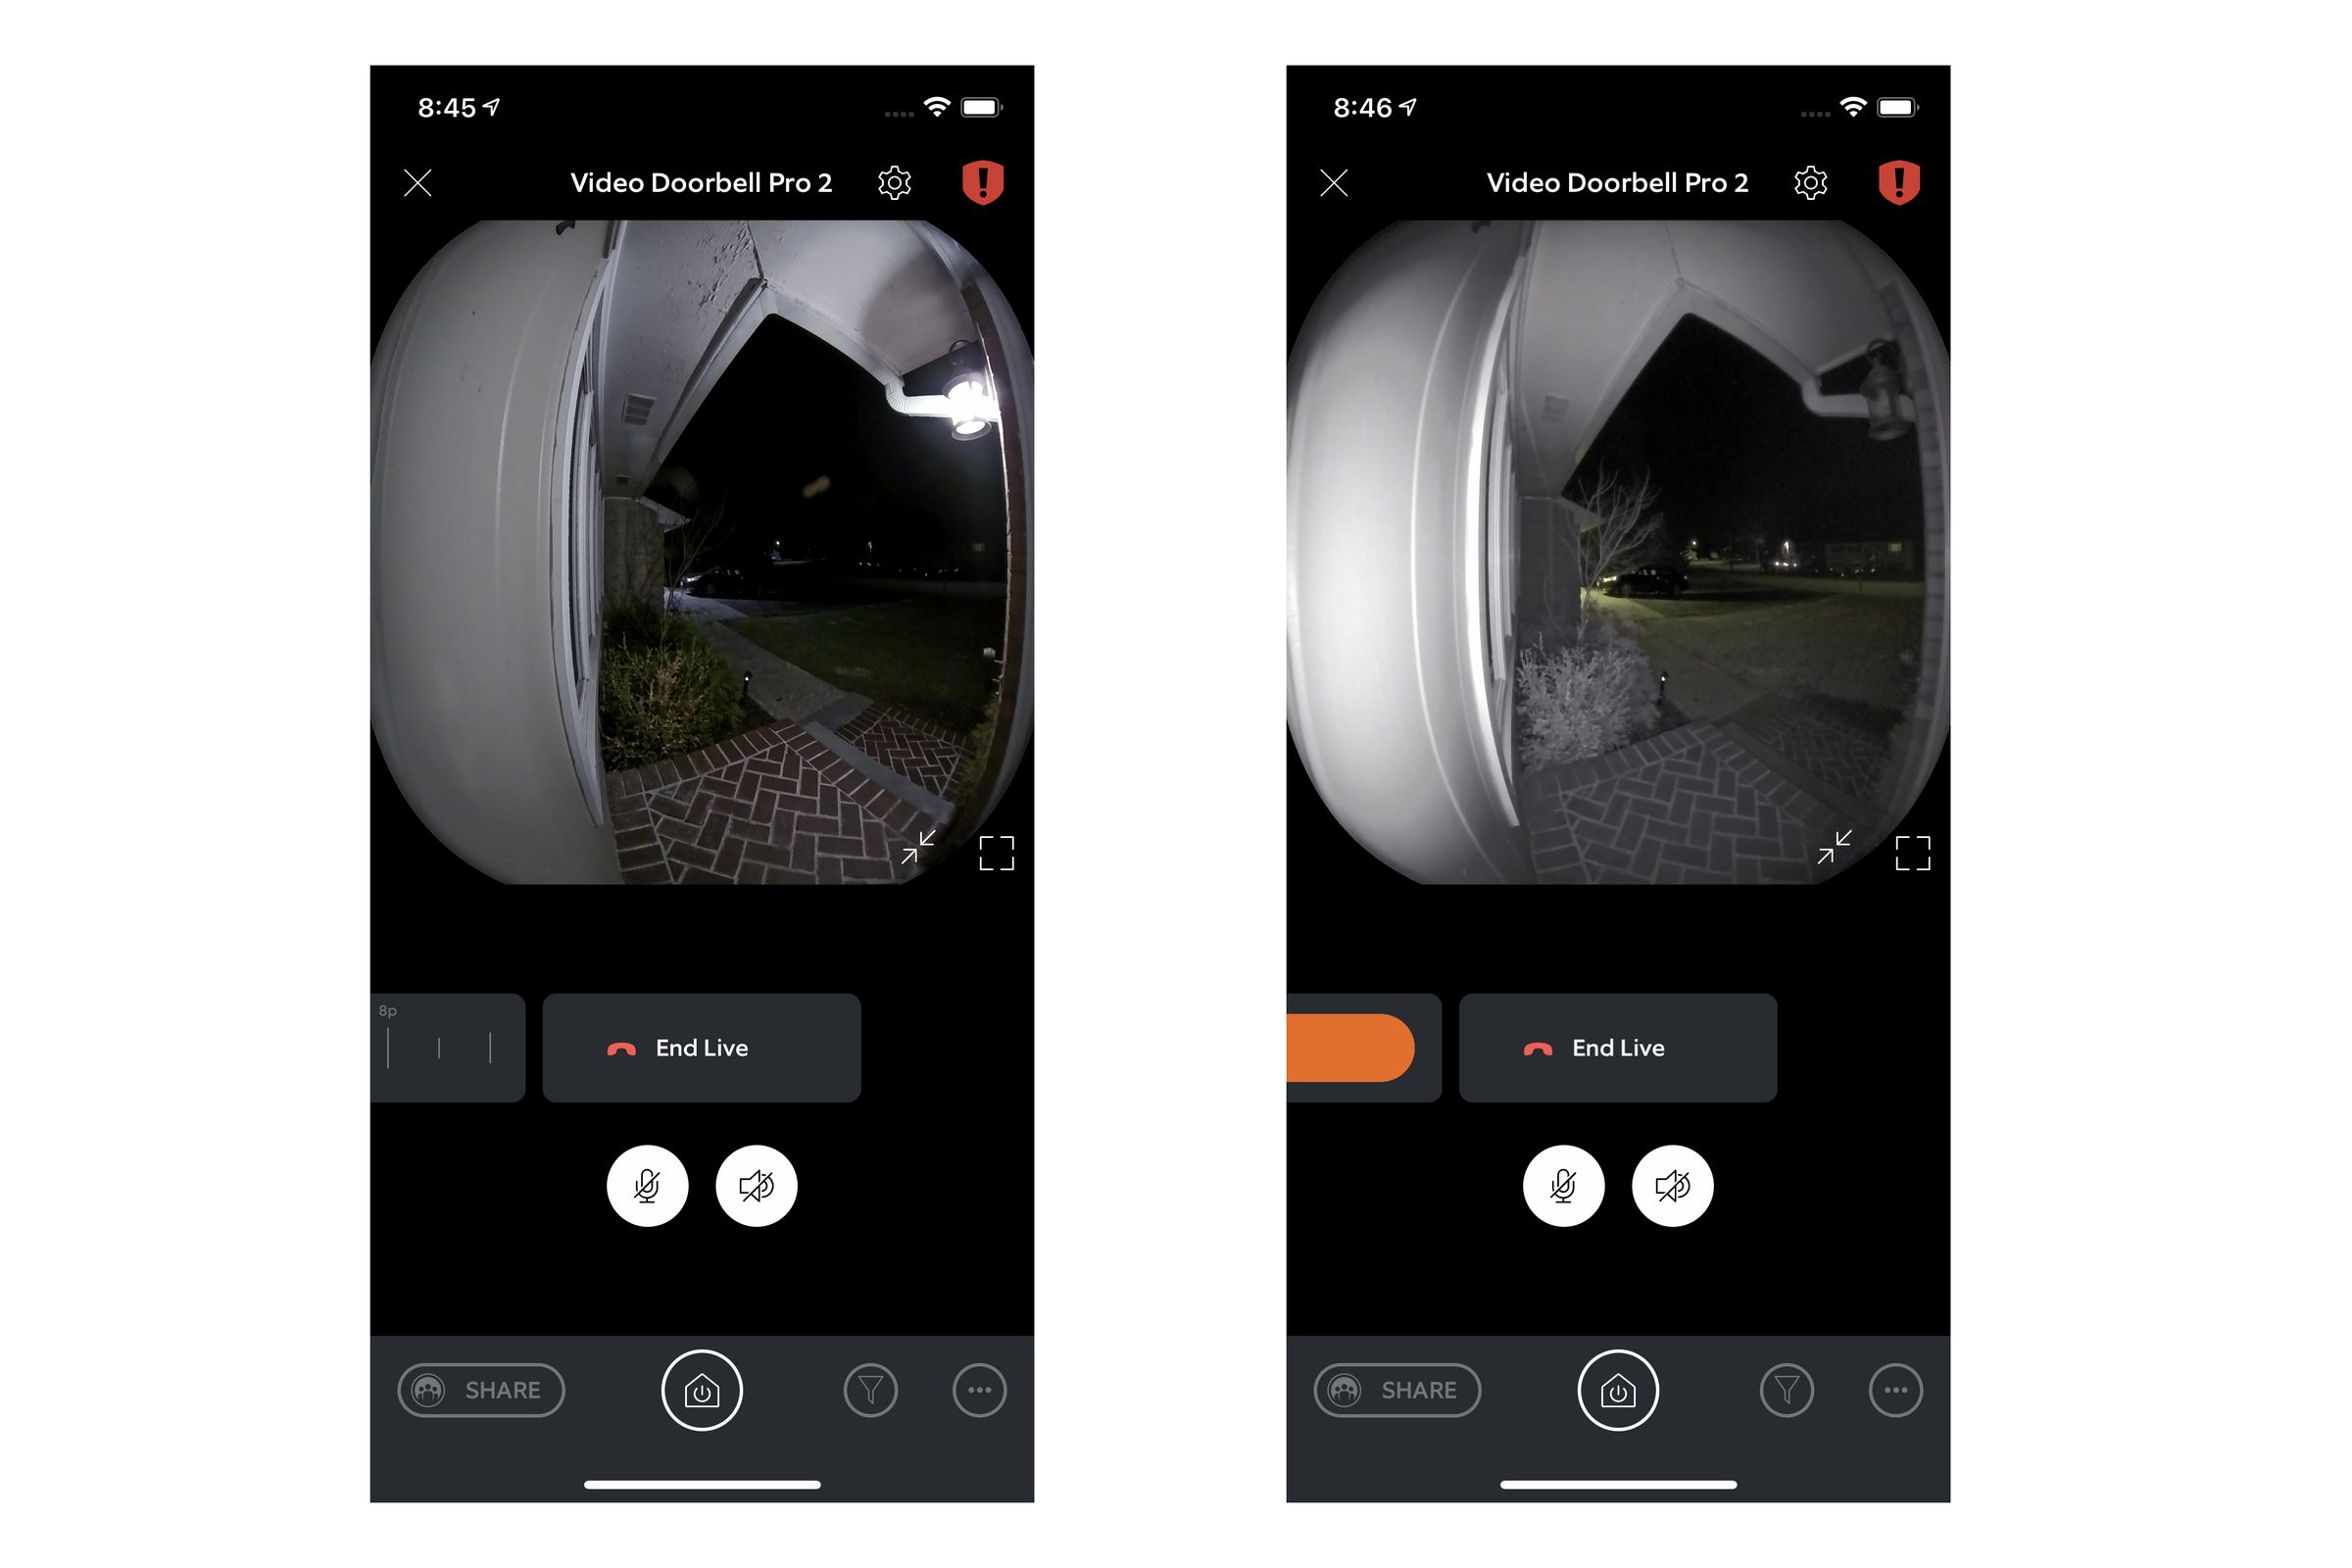 The Video Doorbell Pro 2 has a traditional grayscale infrared night mode (right), but if you have enough light, it will fall back to its color feed at night (left).